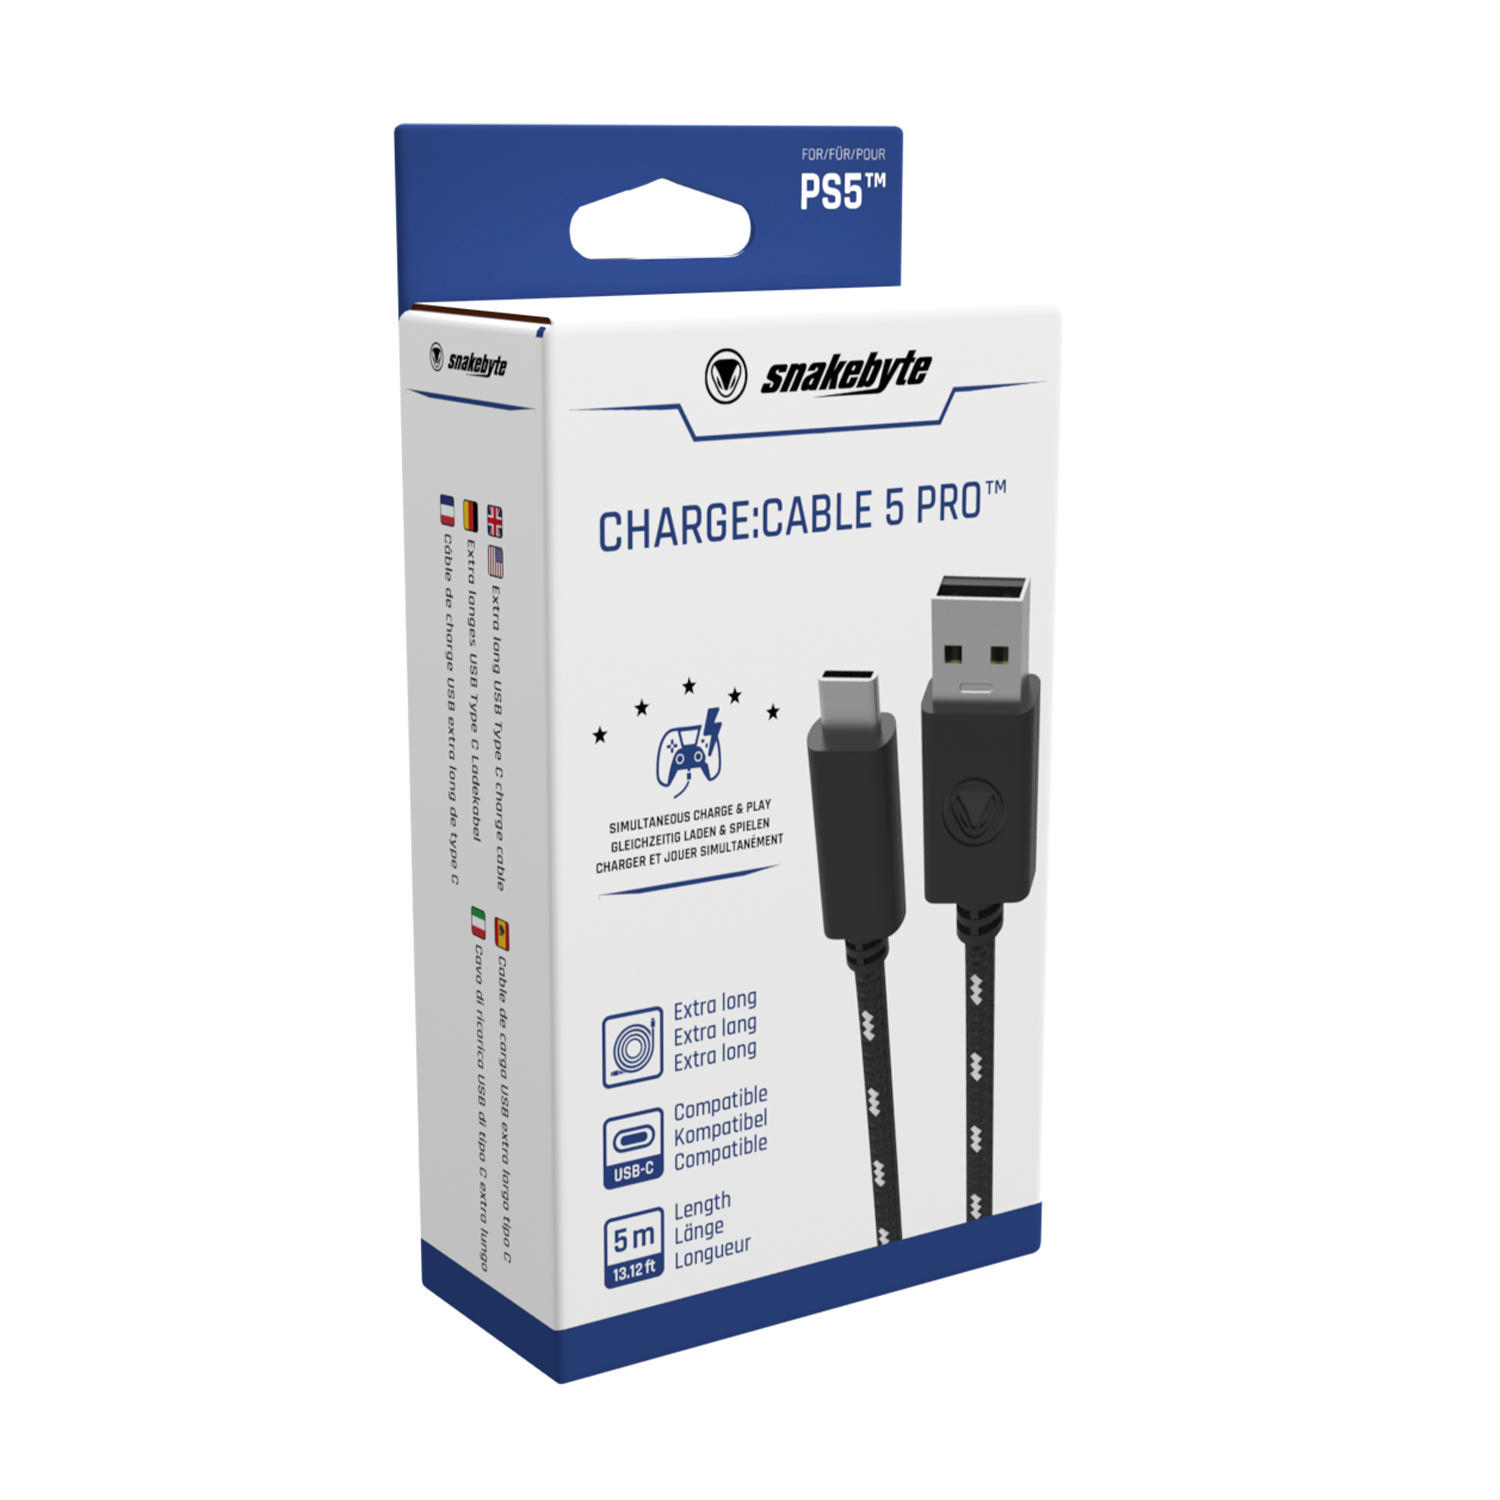 SNAKEBYTE PS5 Charge: Cable 5 2.0 Schwarz/Weiß Ladekabel, PRO™ USB (5m)